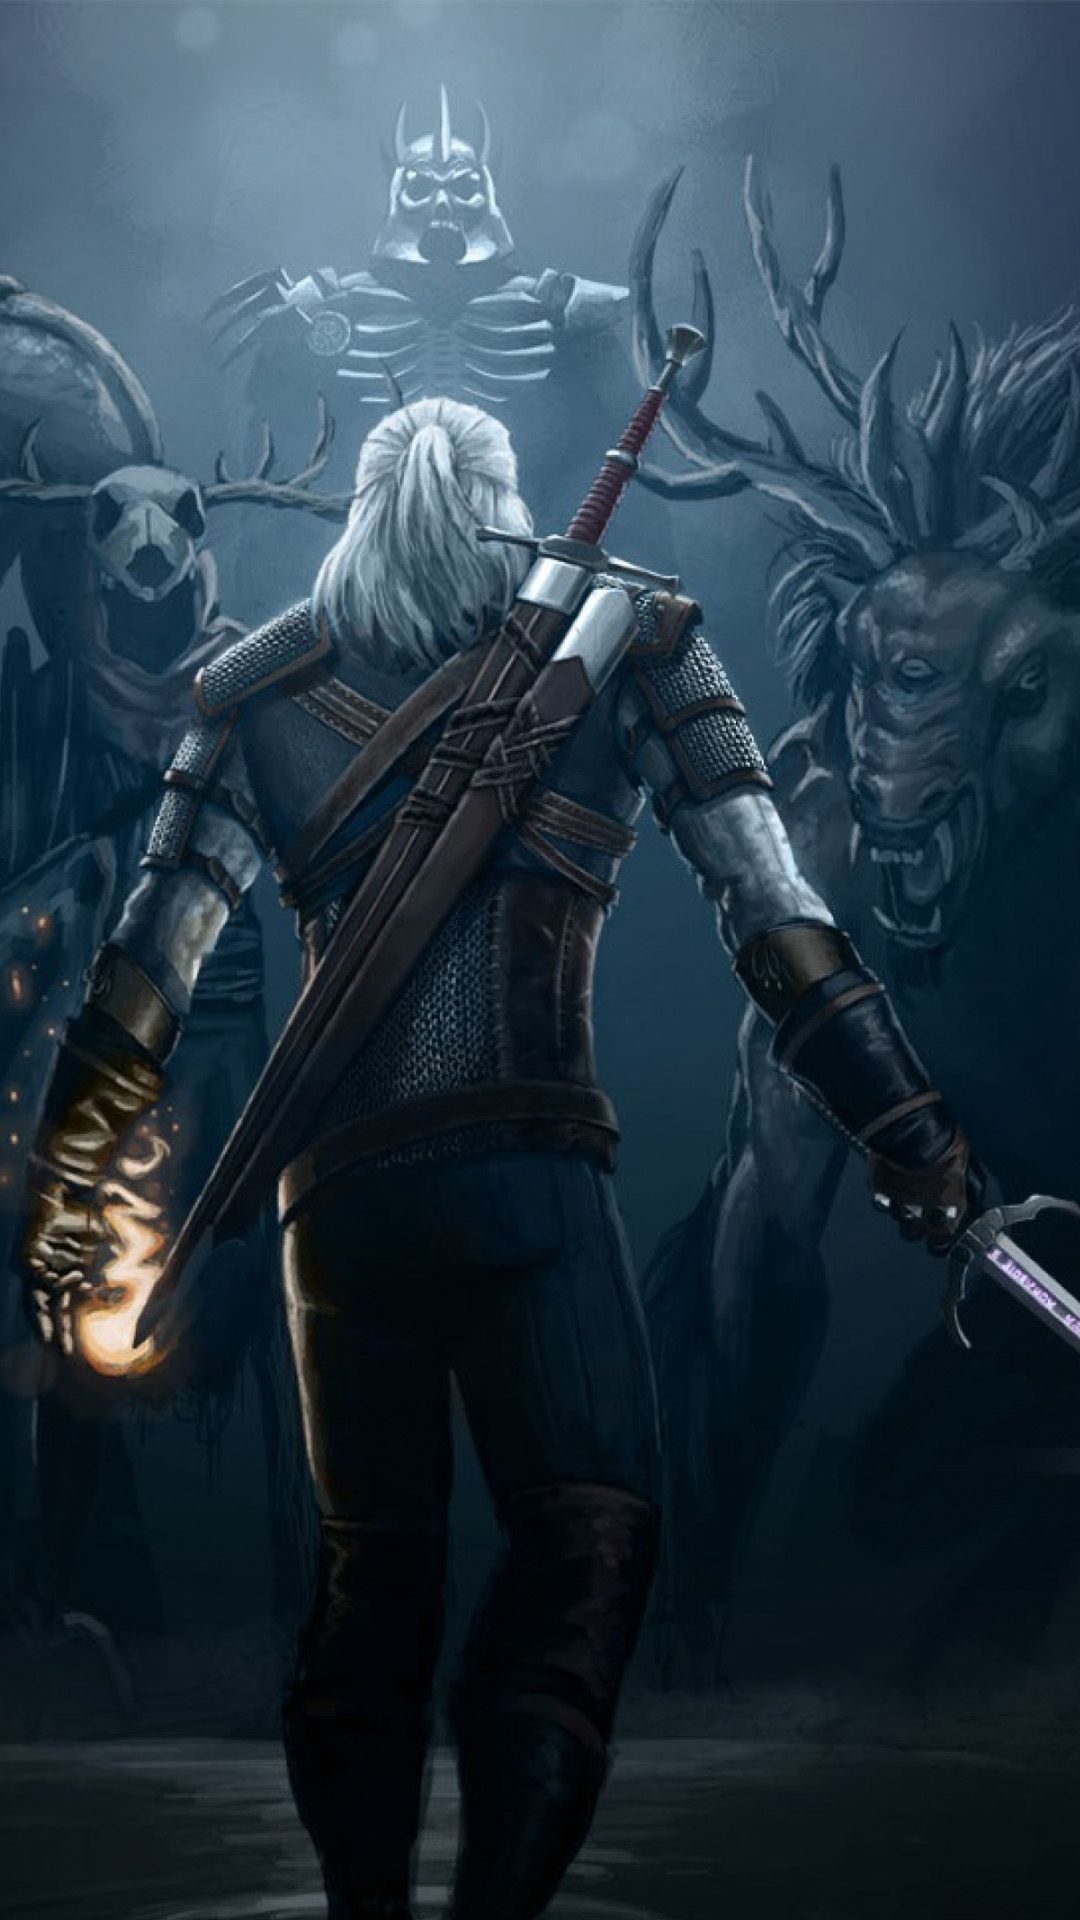 The Witcher 3 Wallpaper 1080p Hupages Download iPhone Wallpaper. The witcher wild hunt, The witcher The witcher